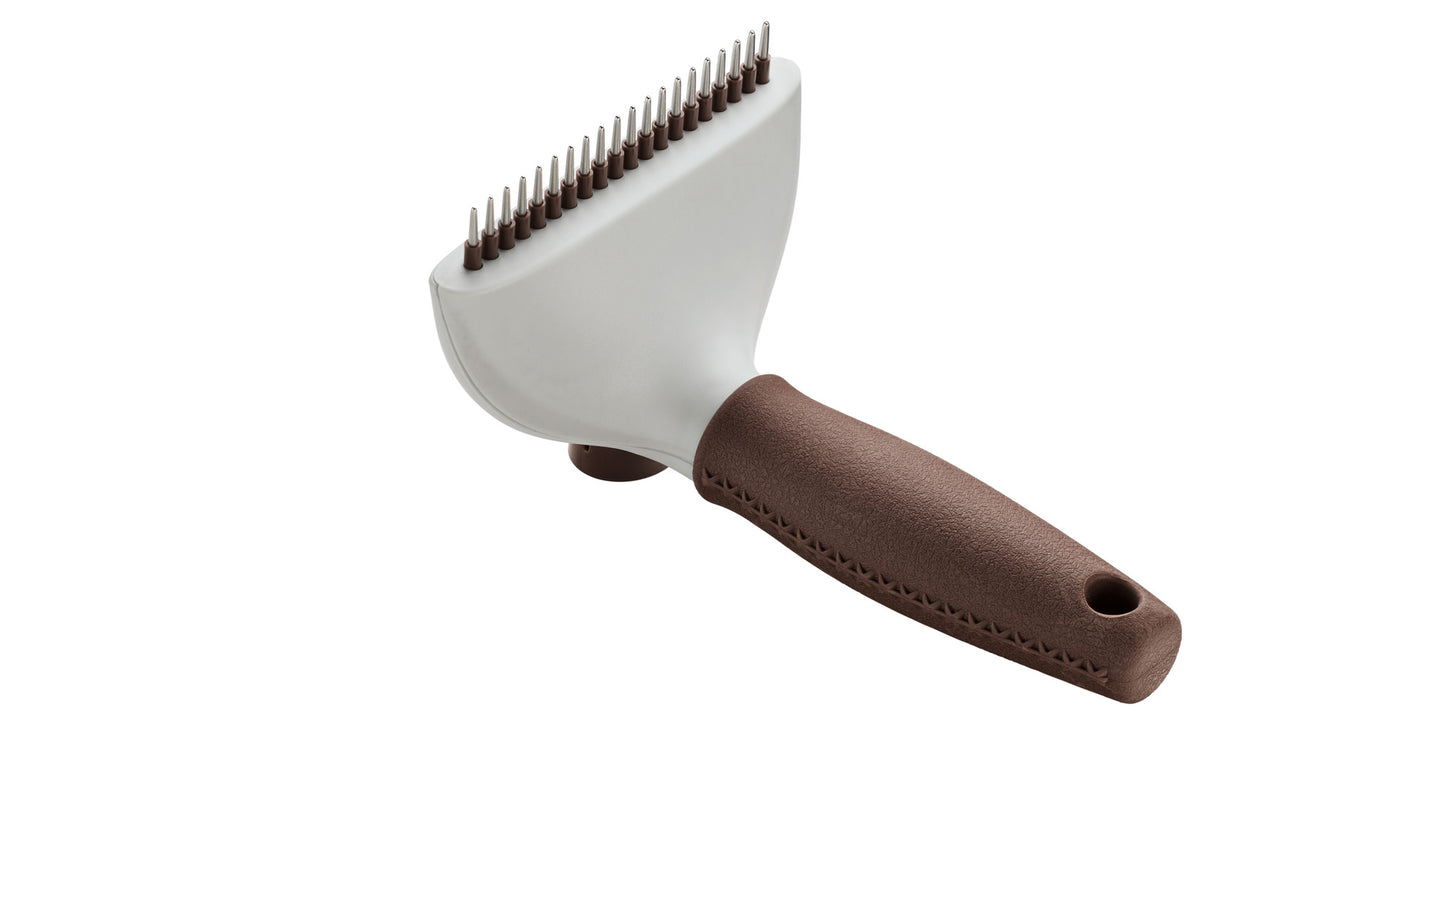 Detangling Spa Curry Comb - Self-cleaning